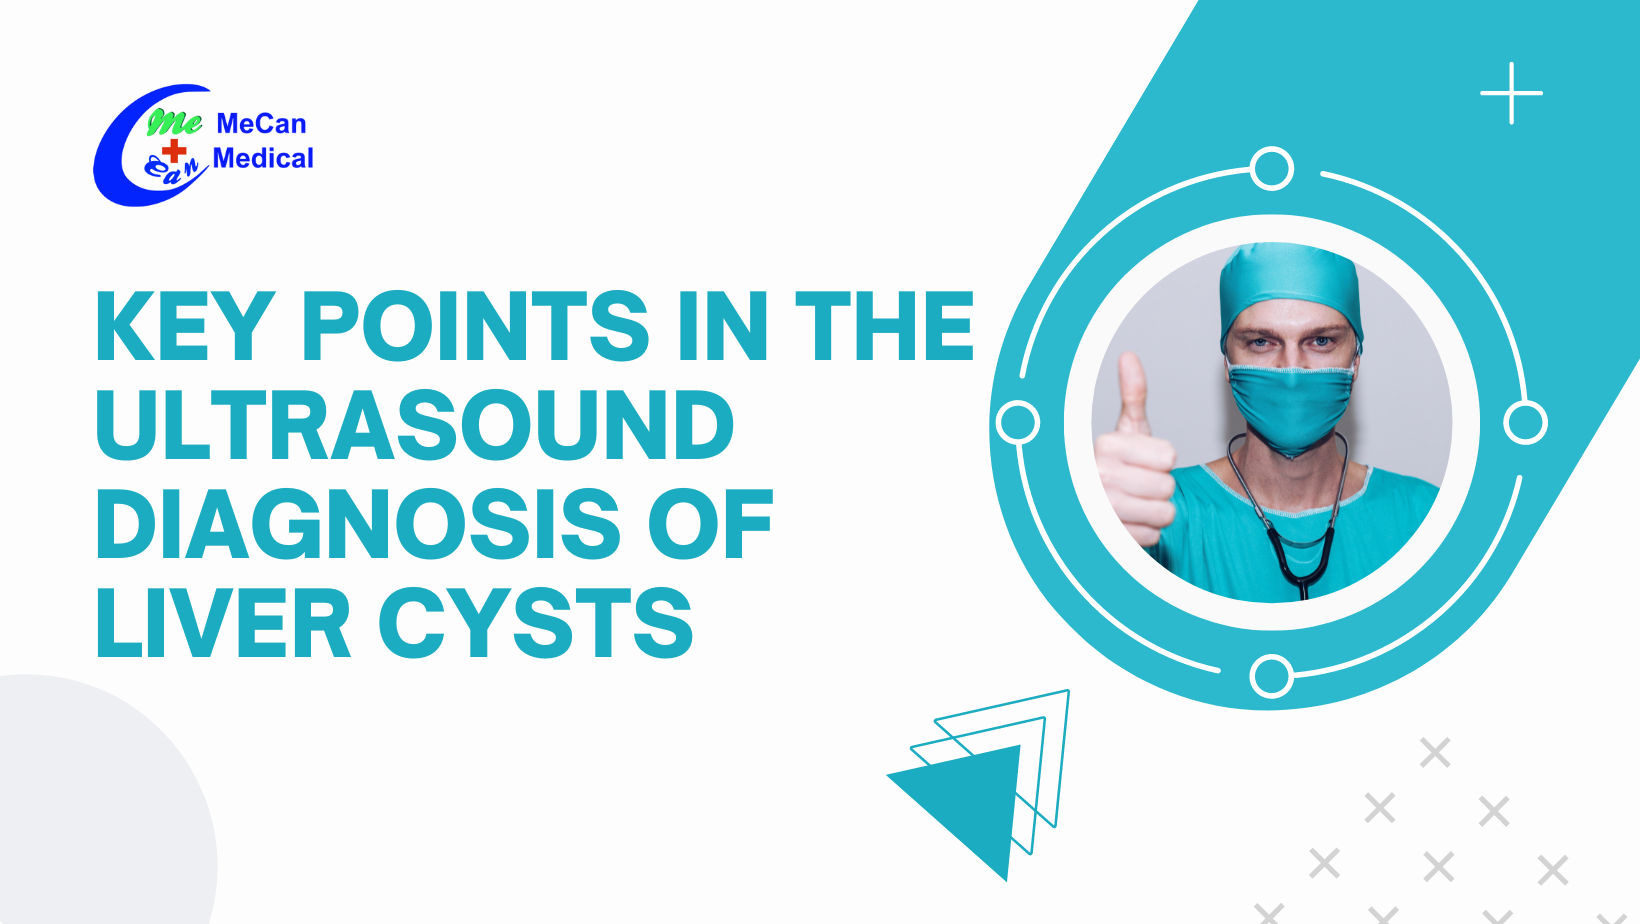 Key Points in the Ultrasound Diagnosis of Liver Cysts